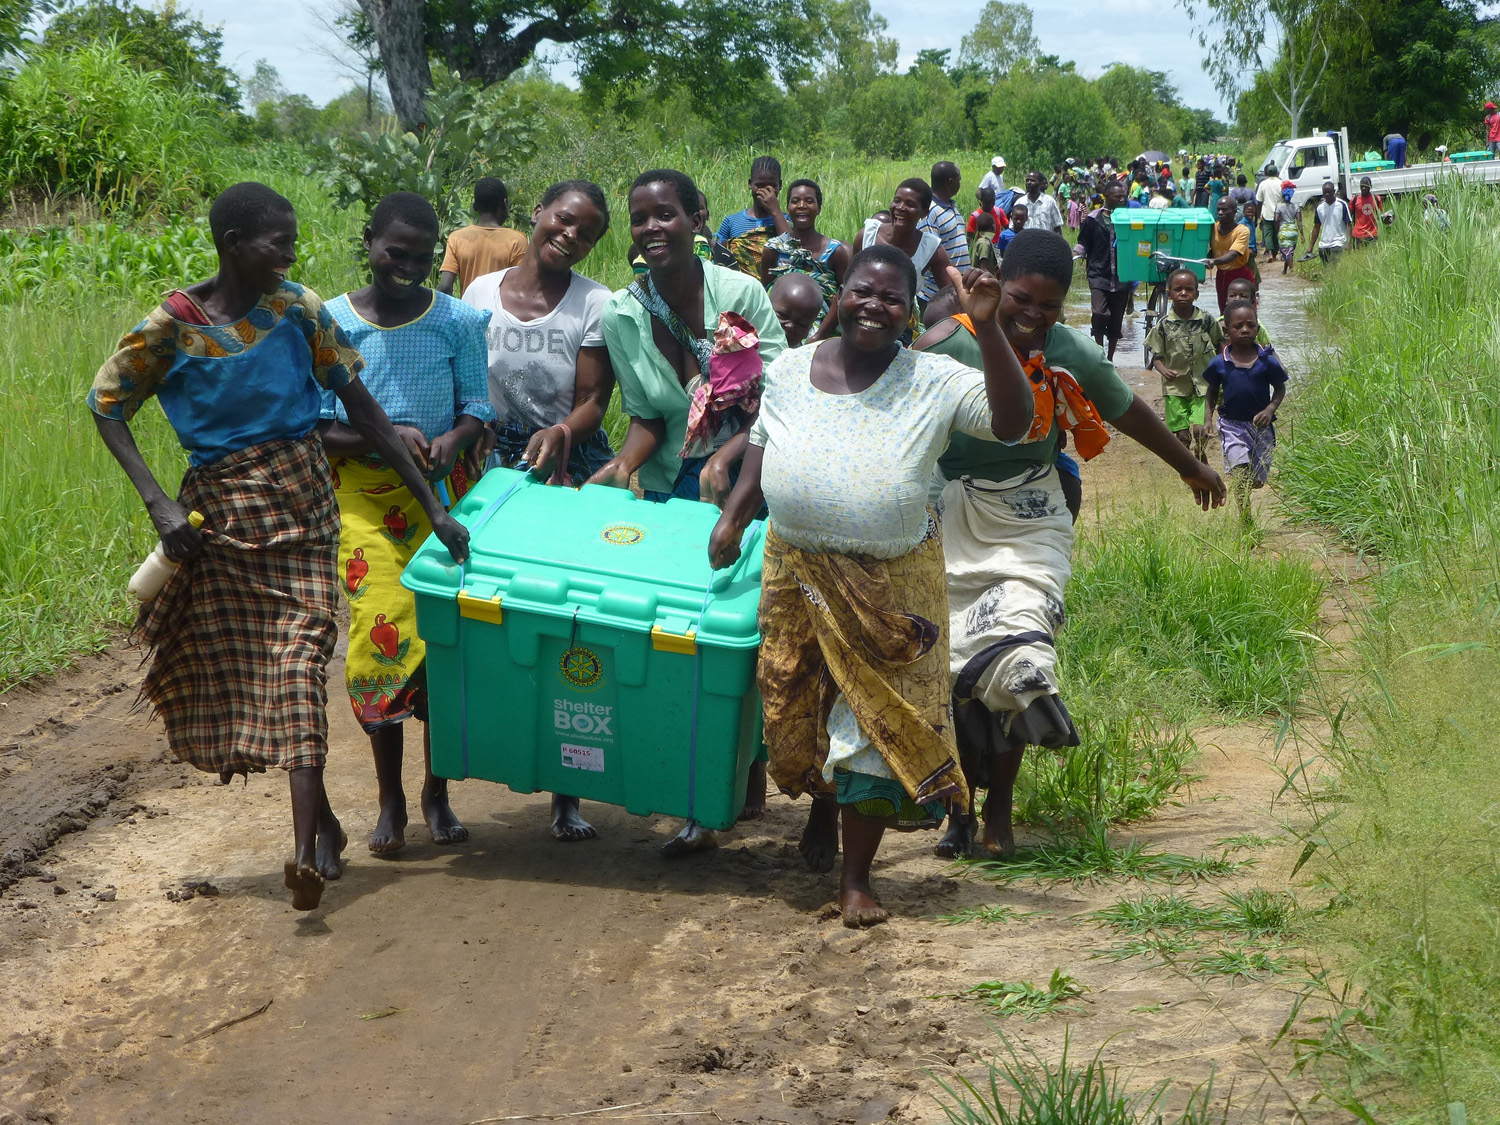 ShelterBox in Malawi 2015